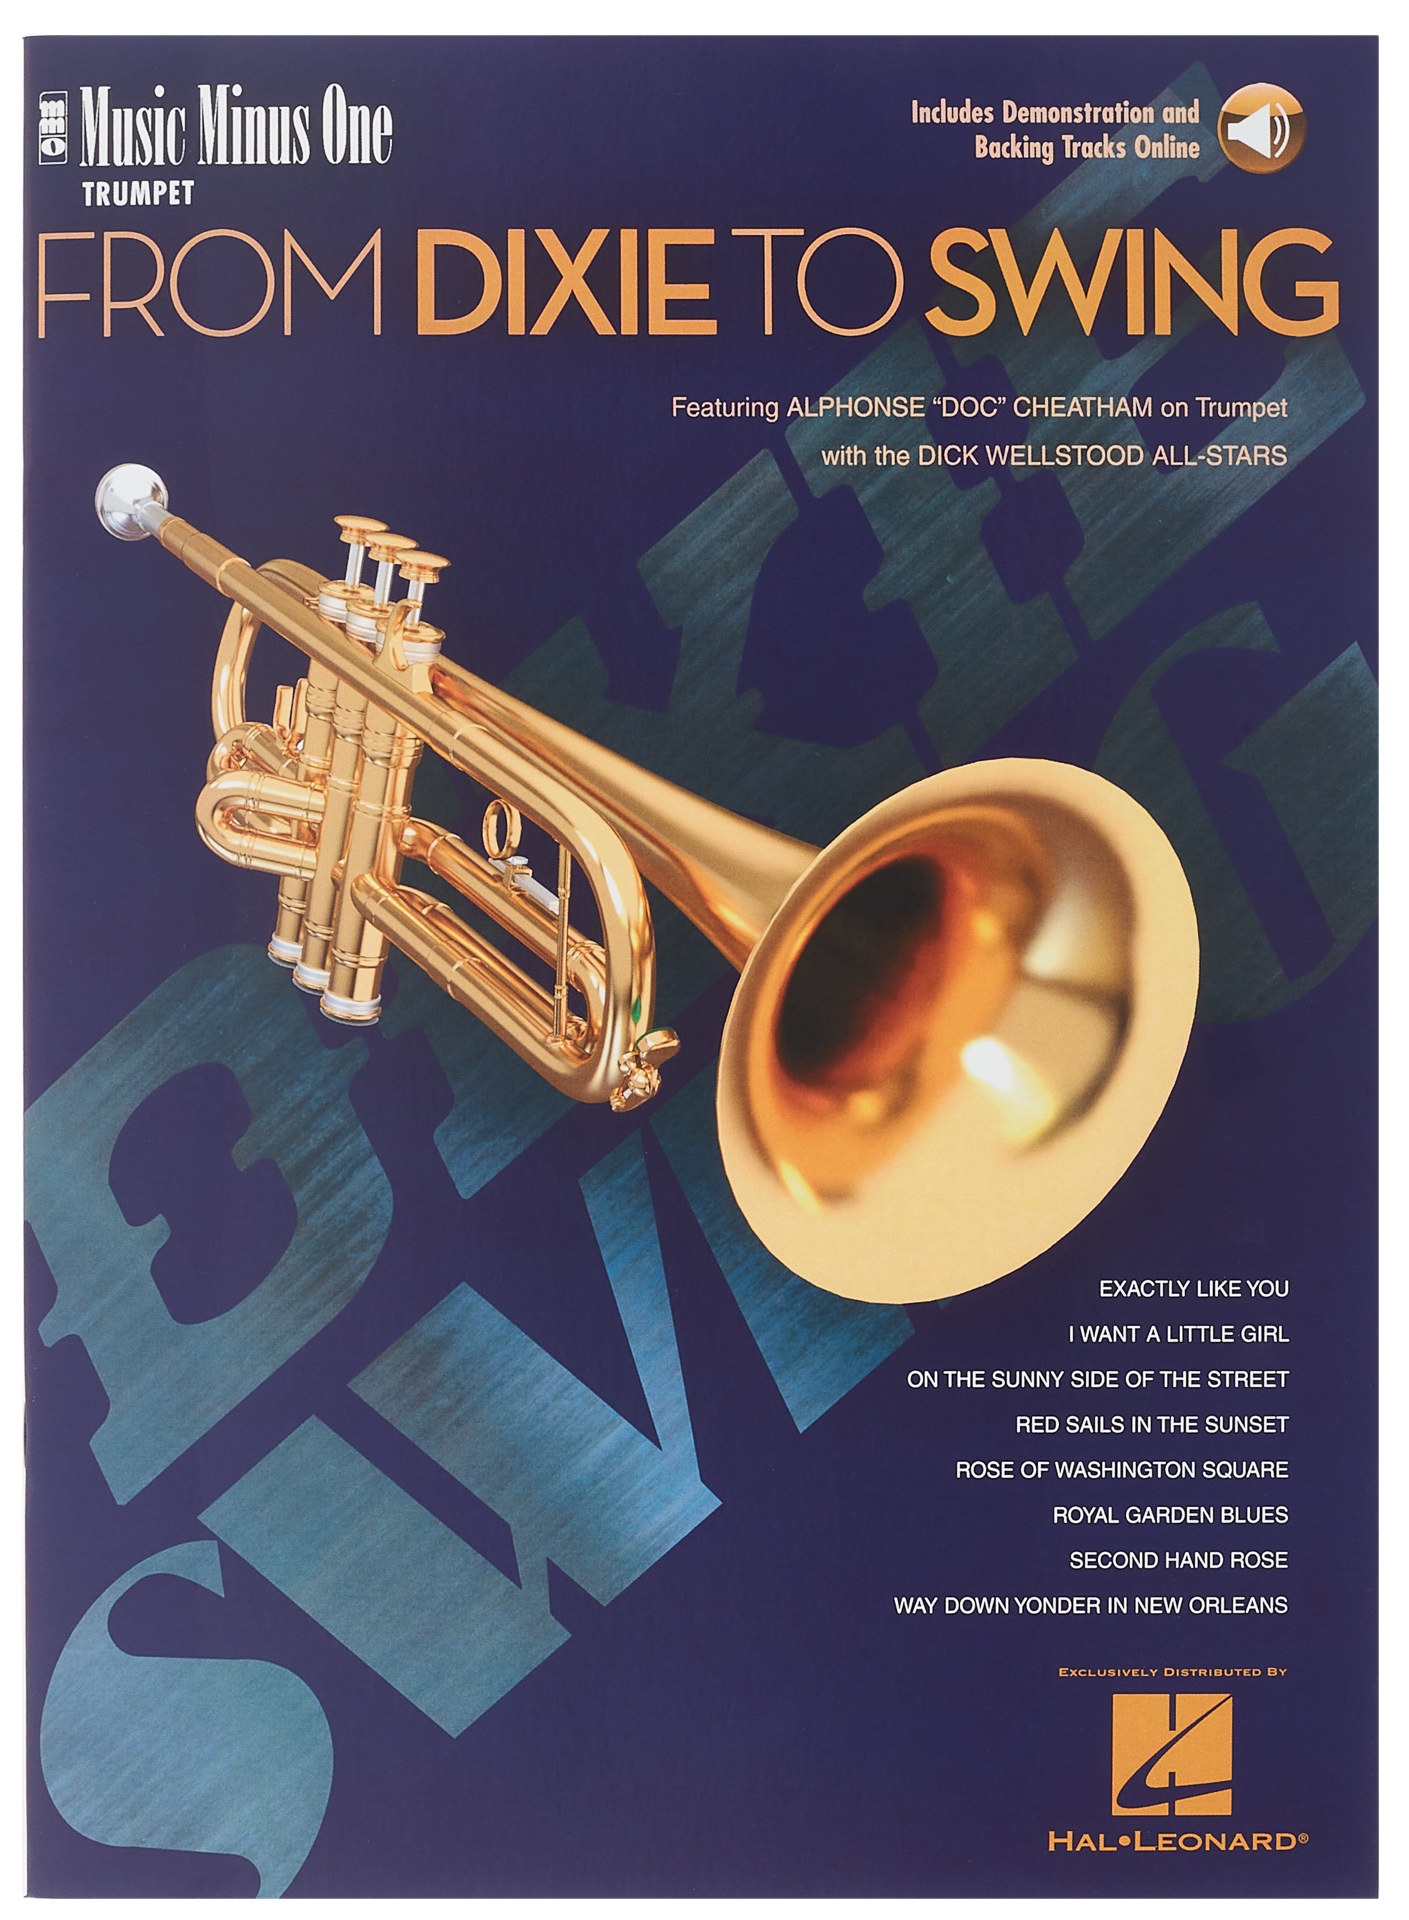 Fotografie MS From Dixie to Swing